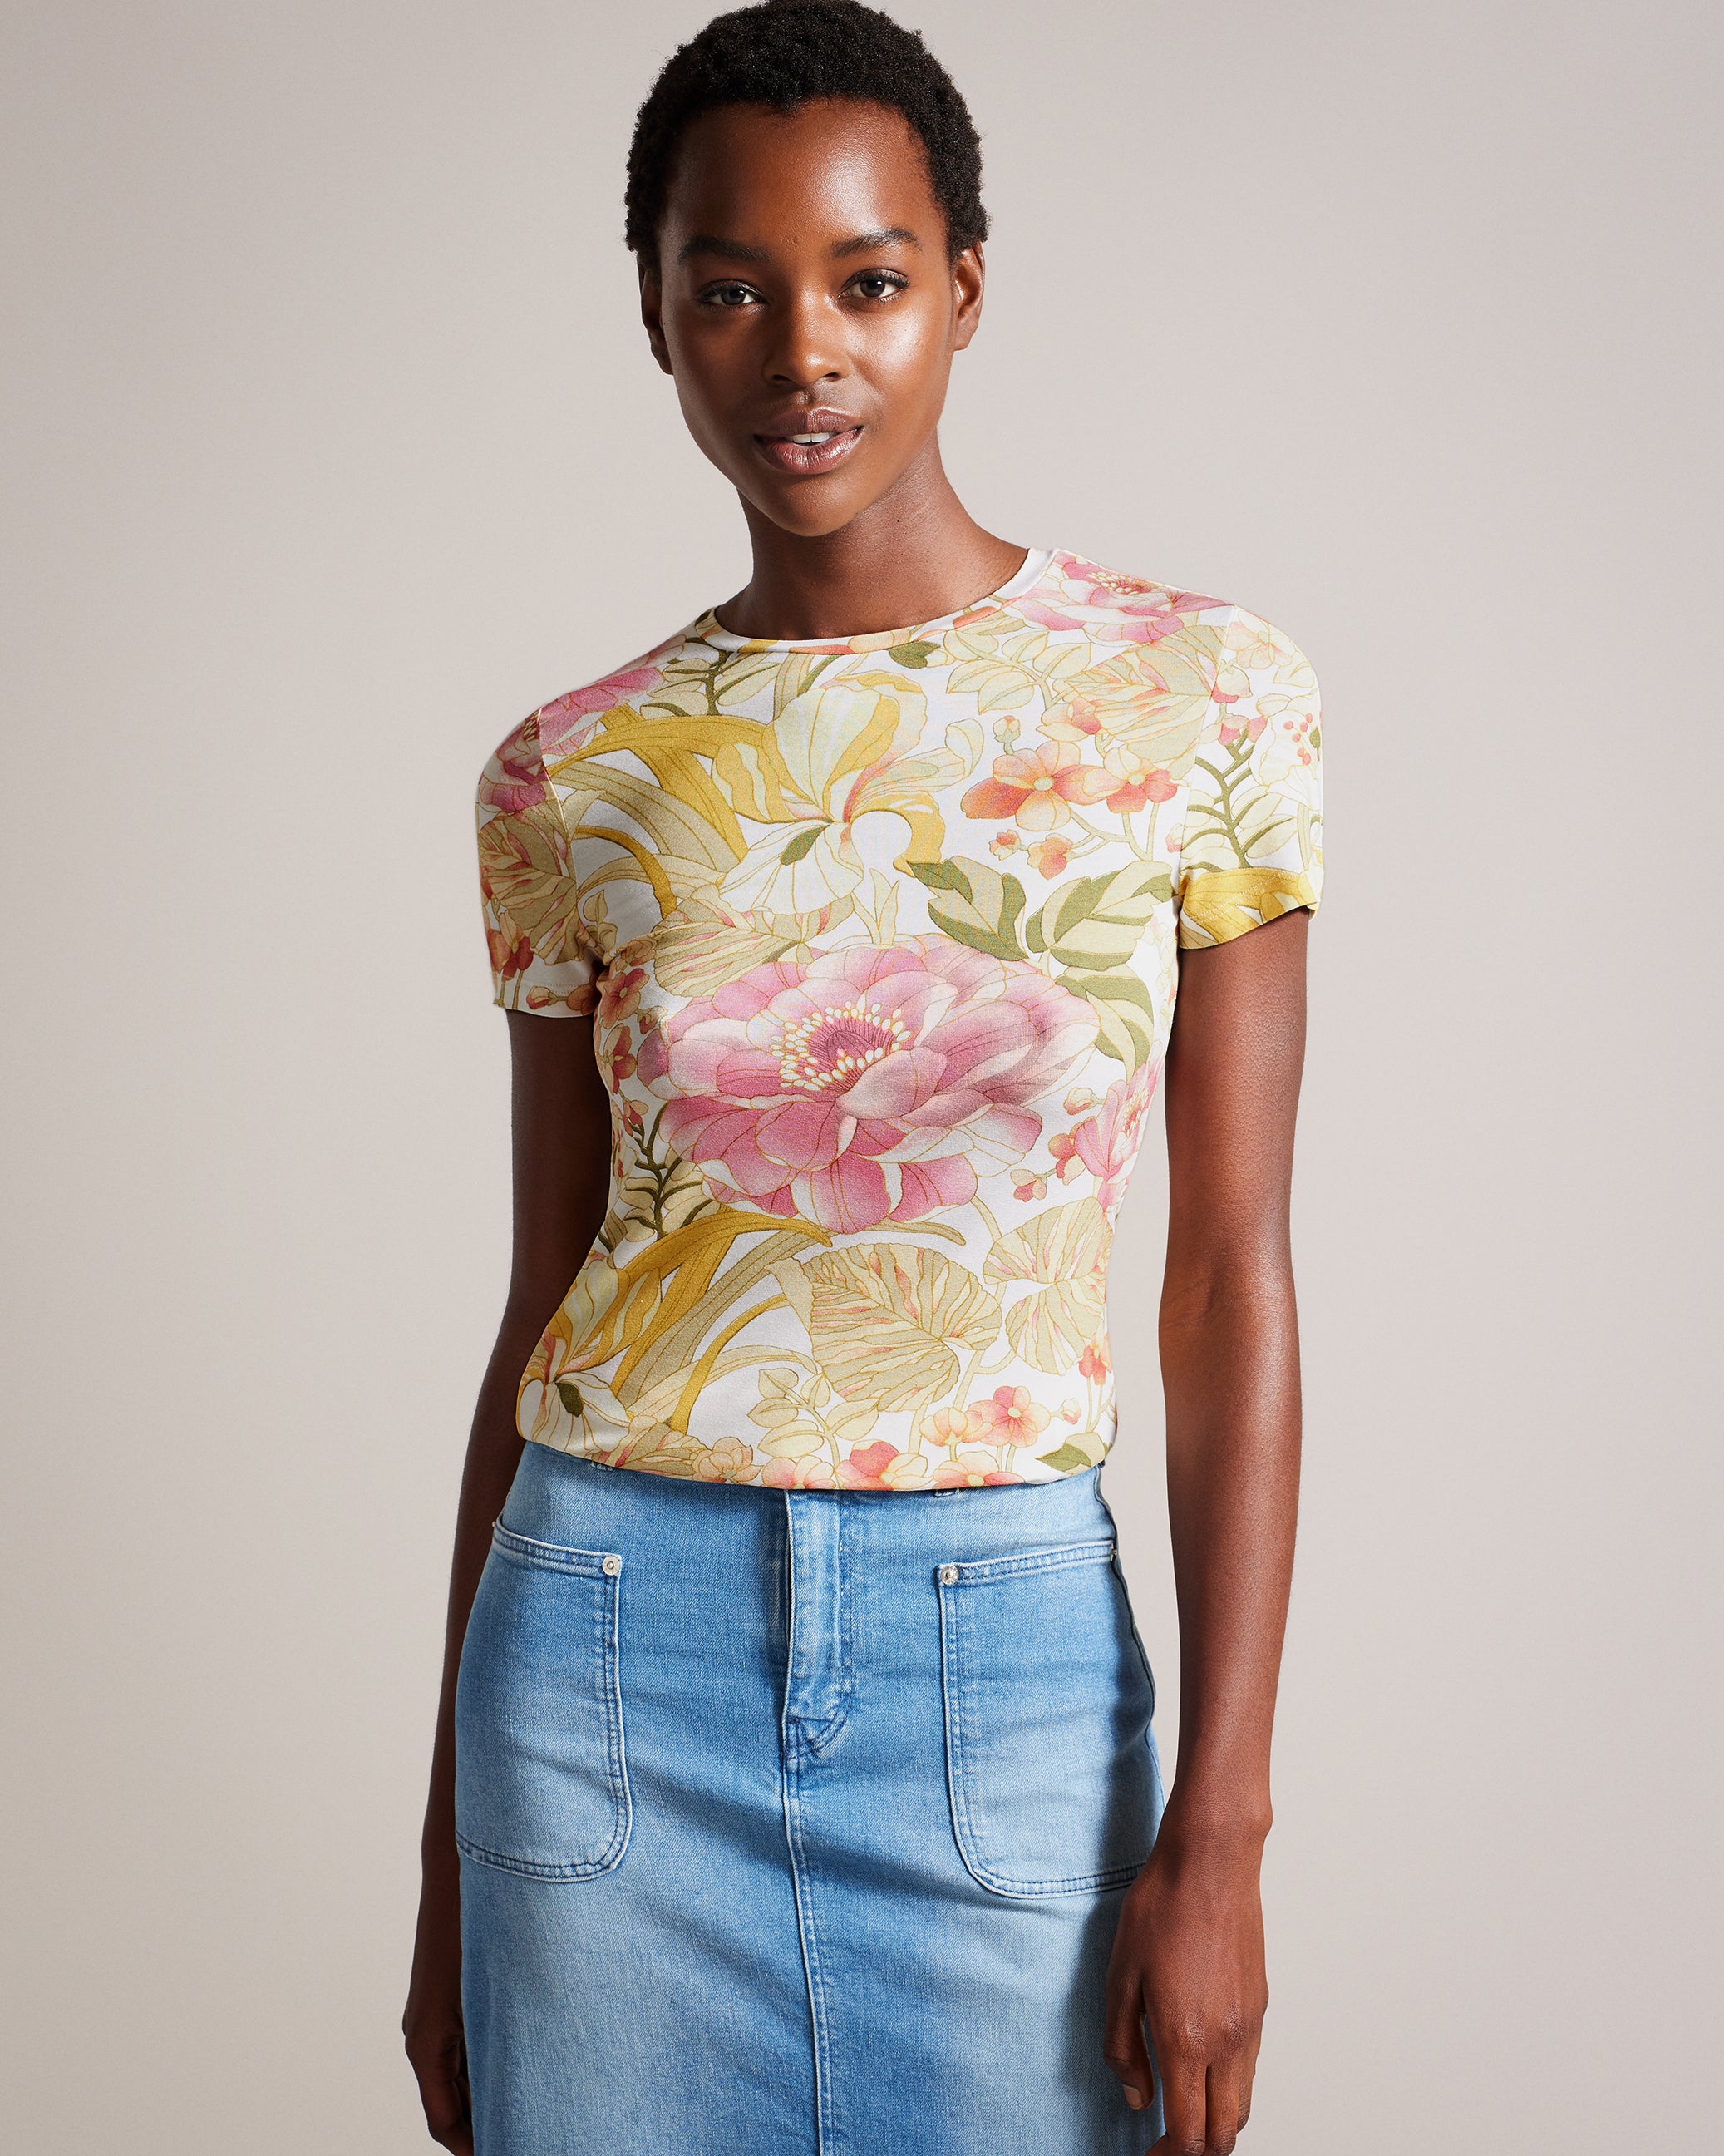 Shop Women's Tops & T-Shirts Outlet Online in Dubai & UAE – Ted